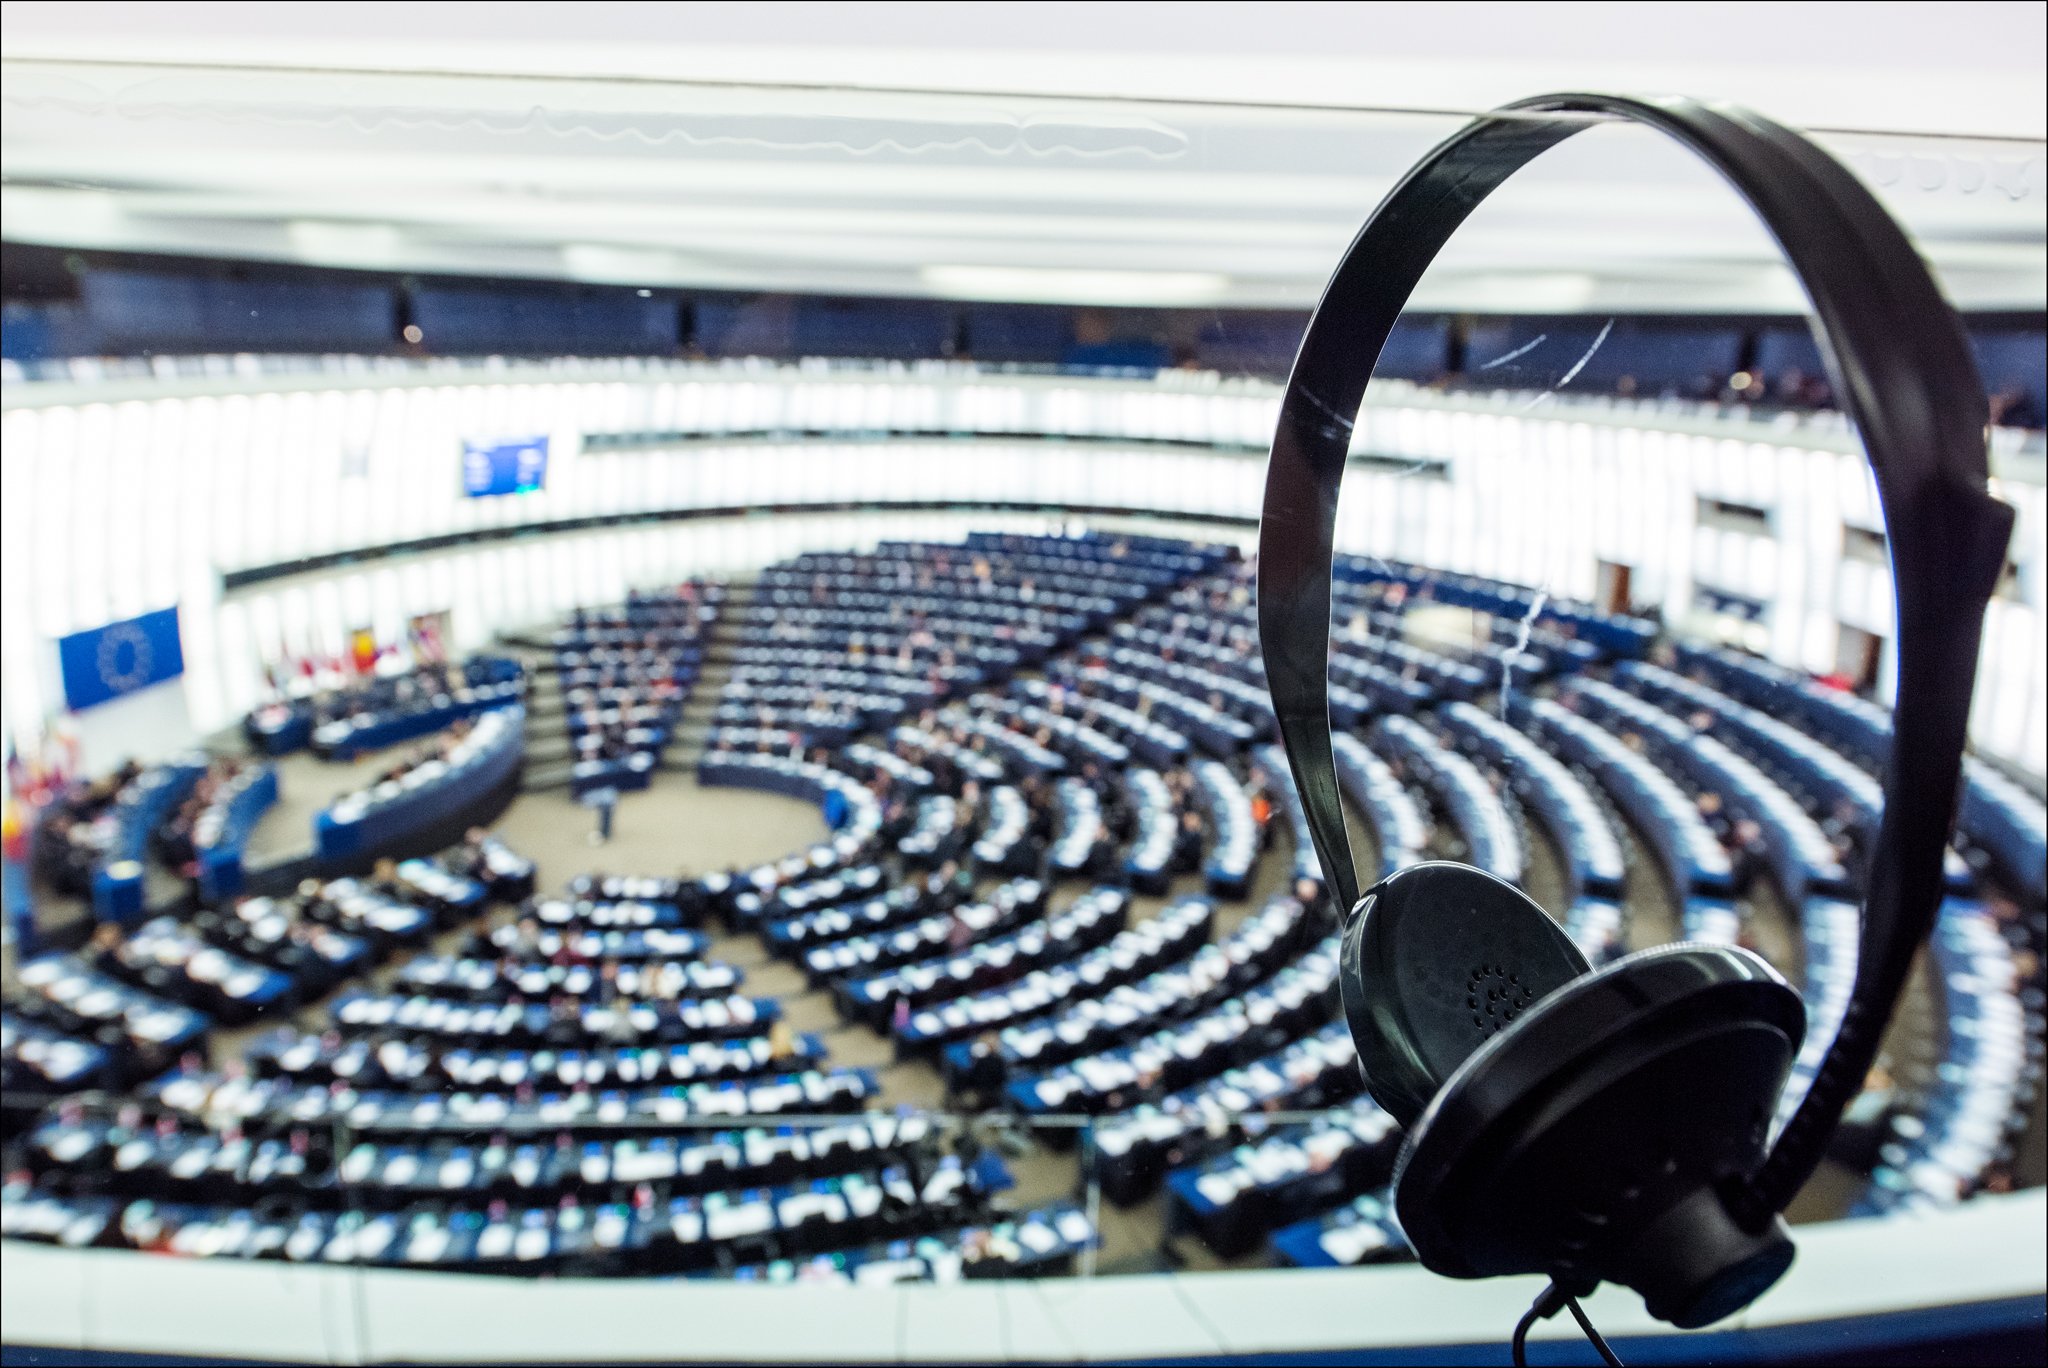 MEPs: Accession of the Western Balkans countries to the EU is its geostrategic priority